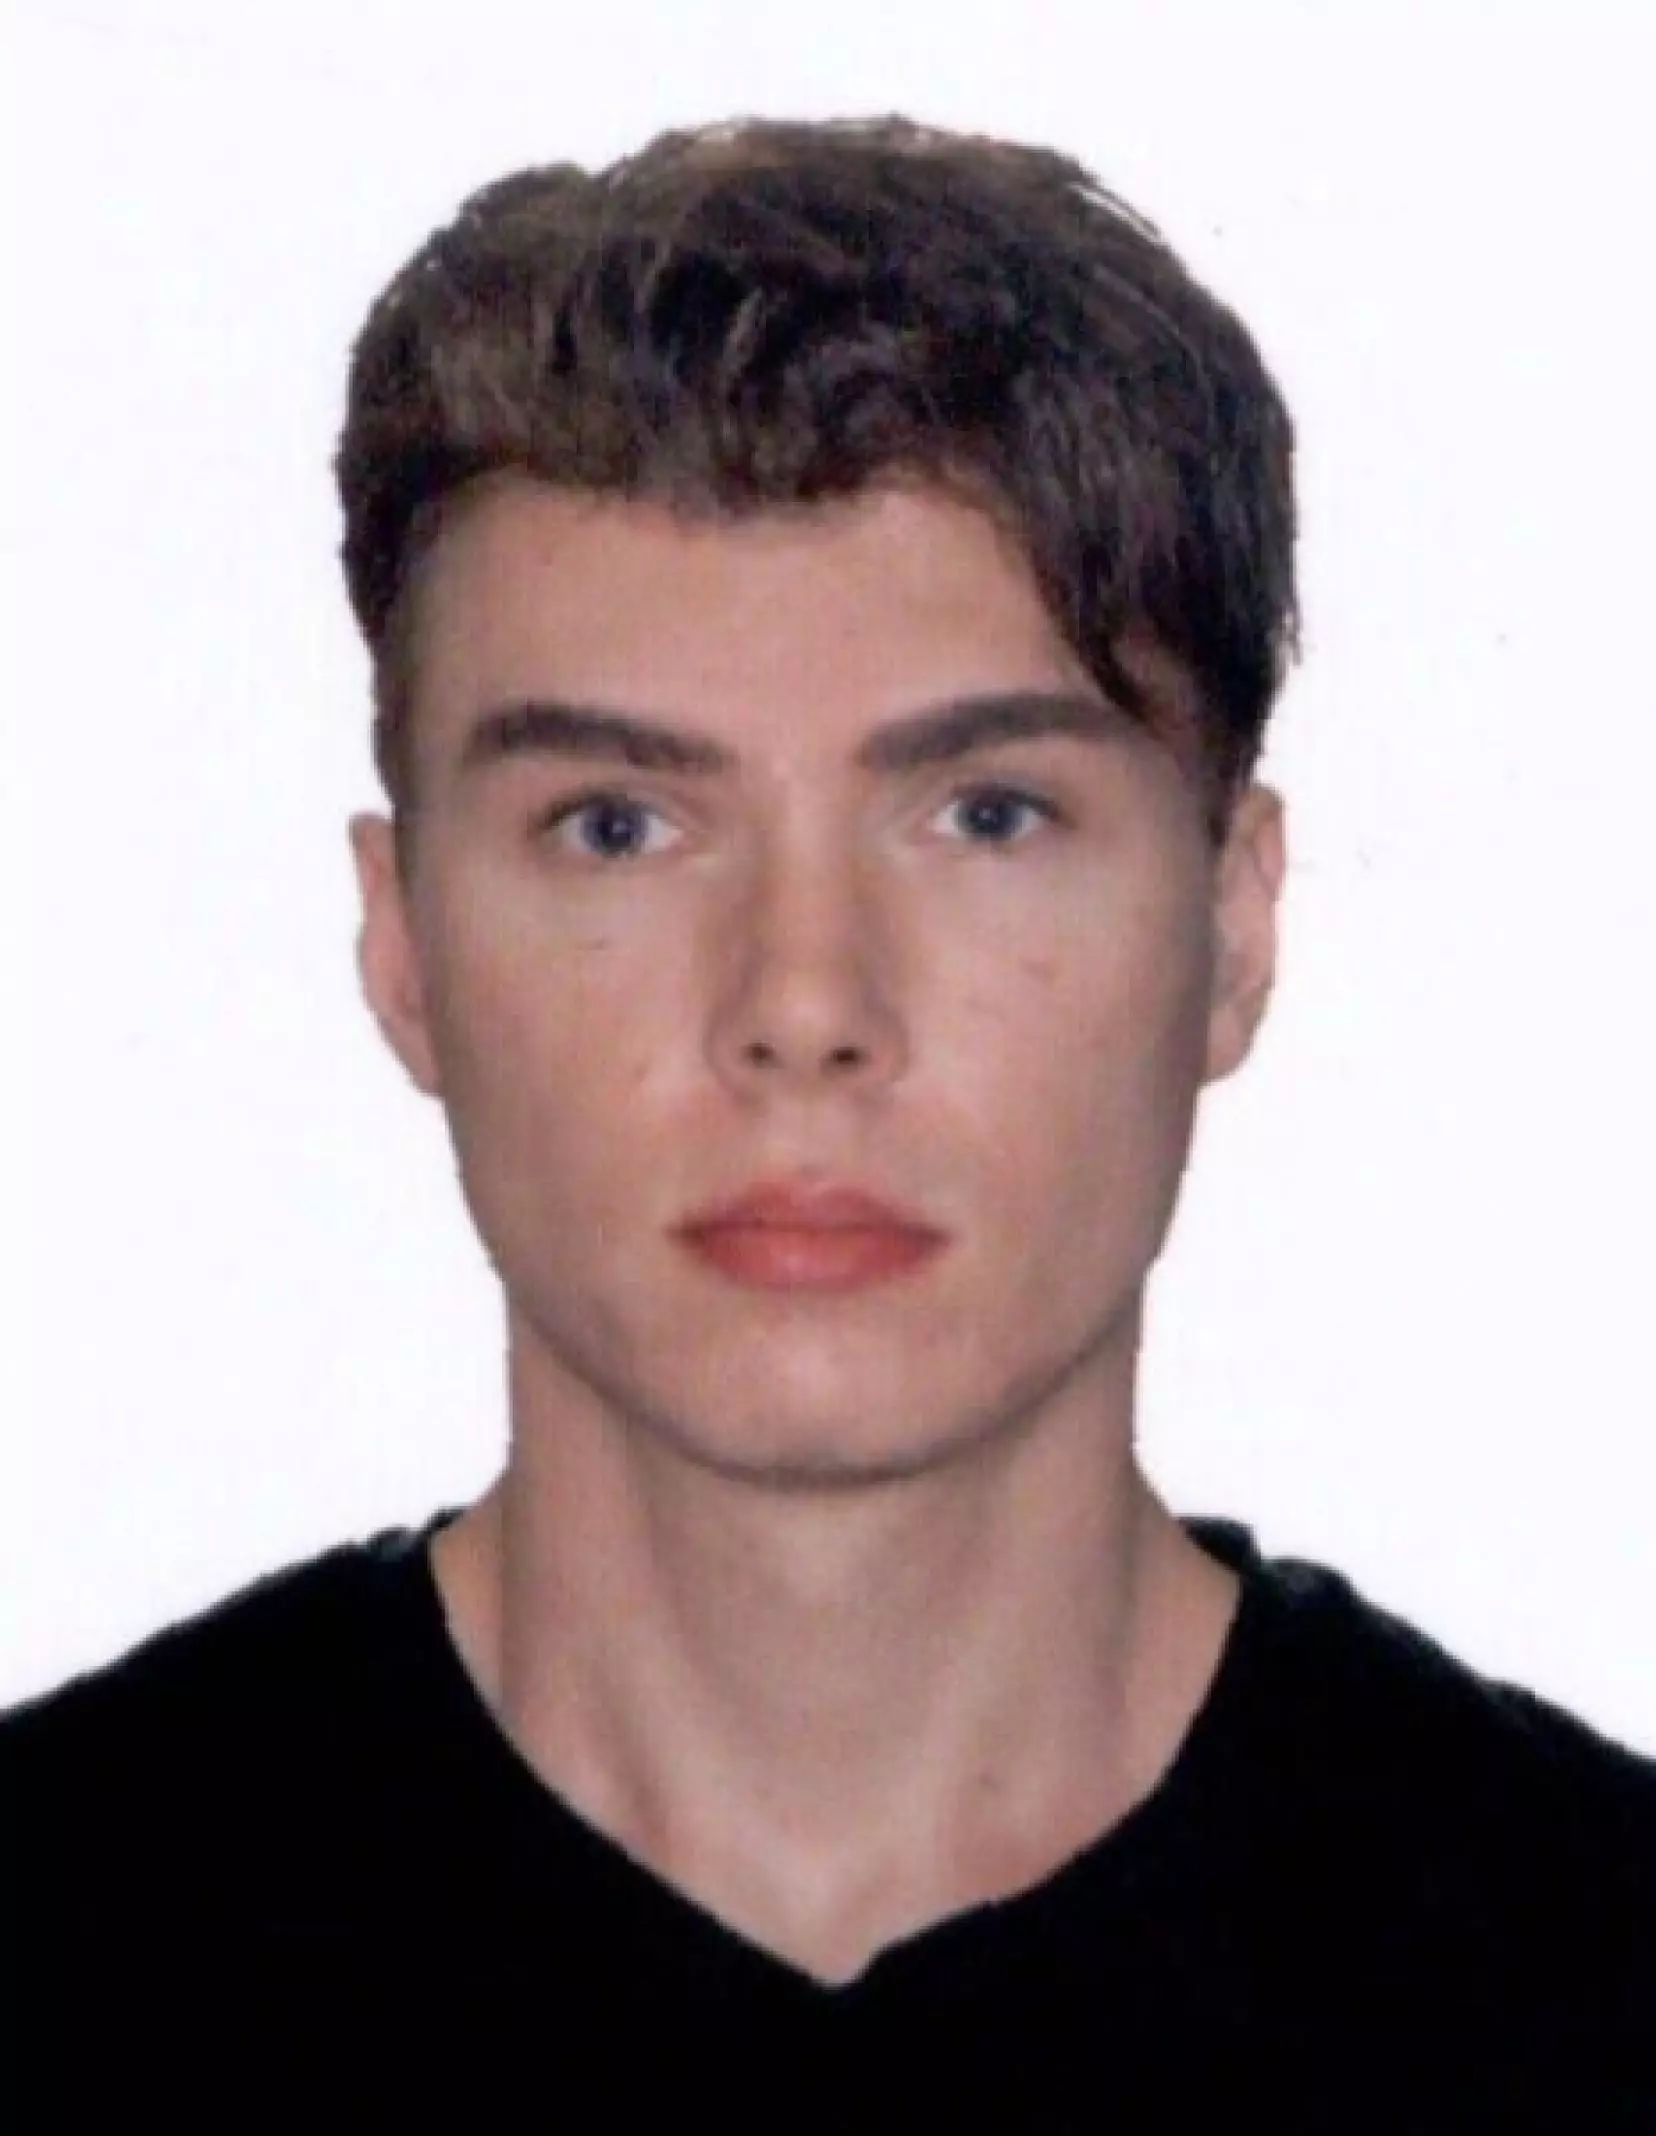 Luka Magnotta committed atrocious crimes.